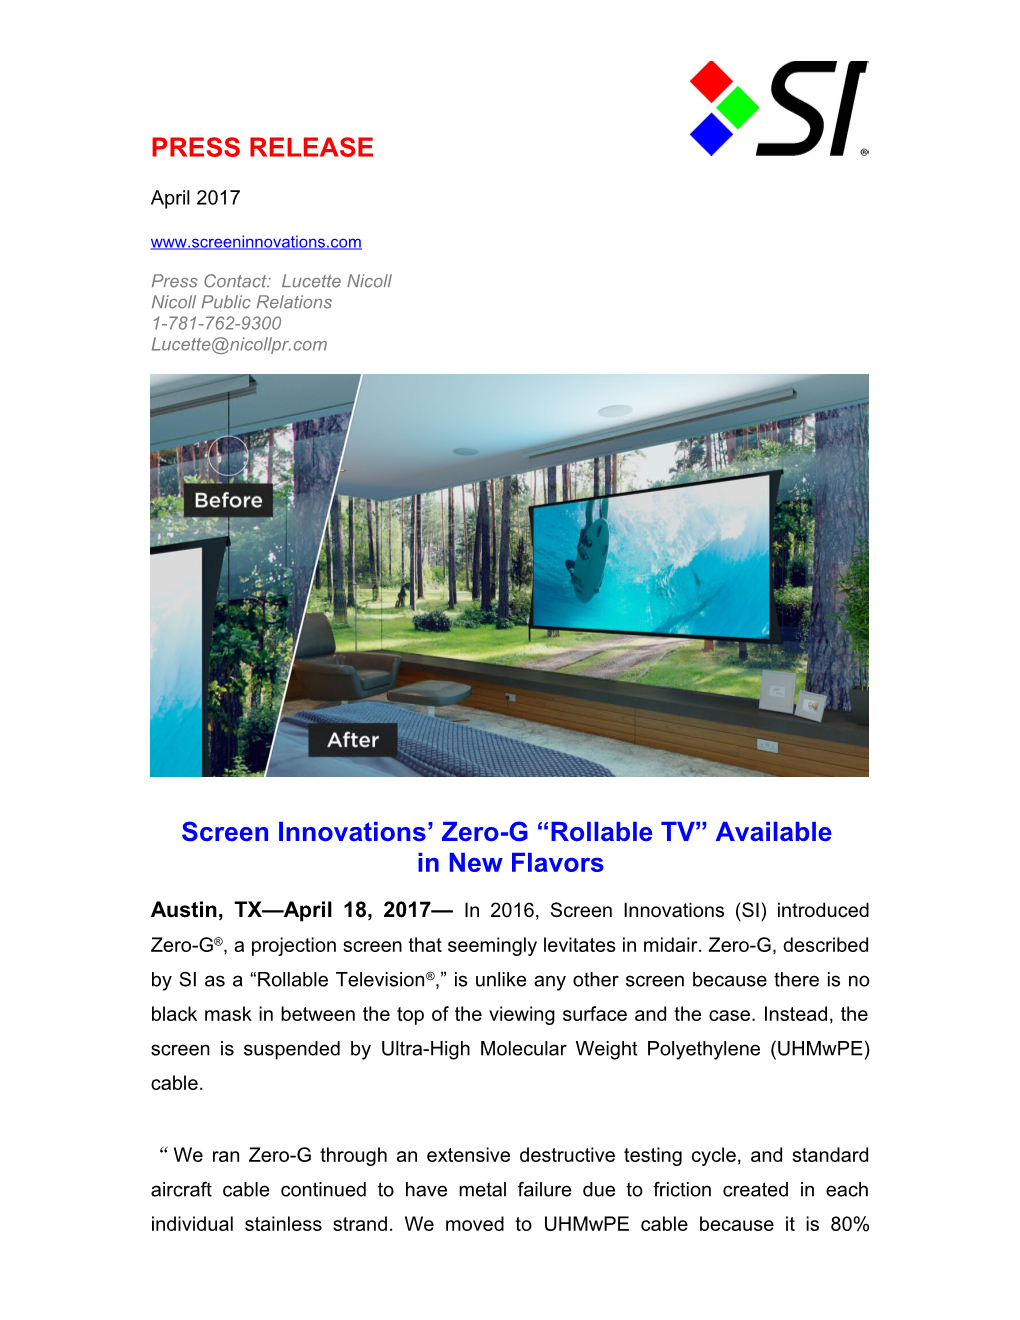 Screen Innovations Zero-G Rollable TV Available